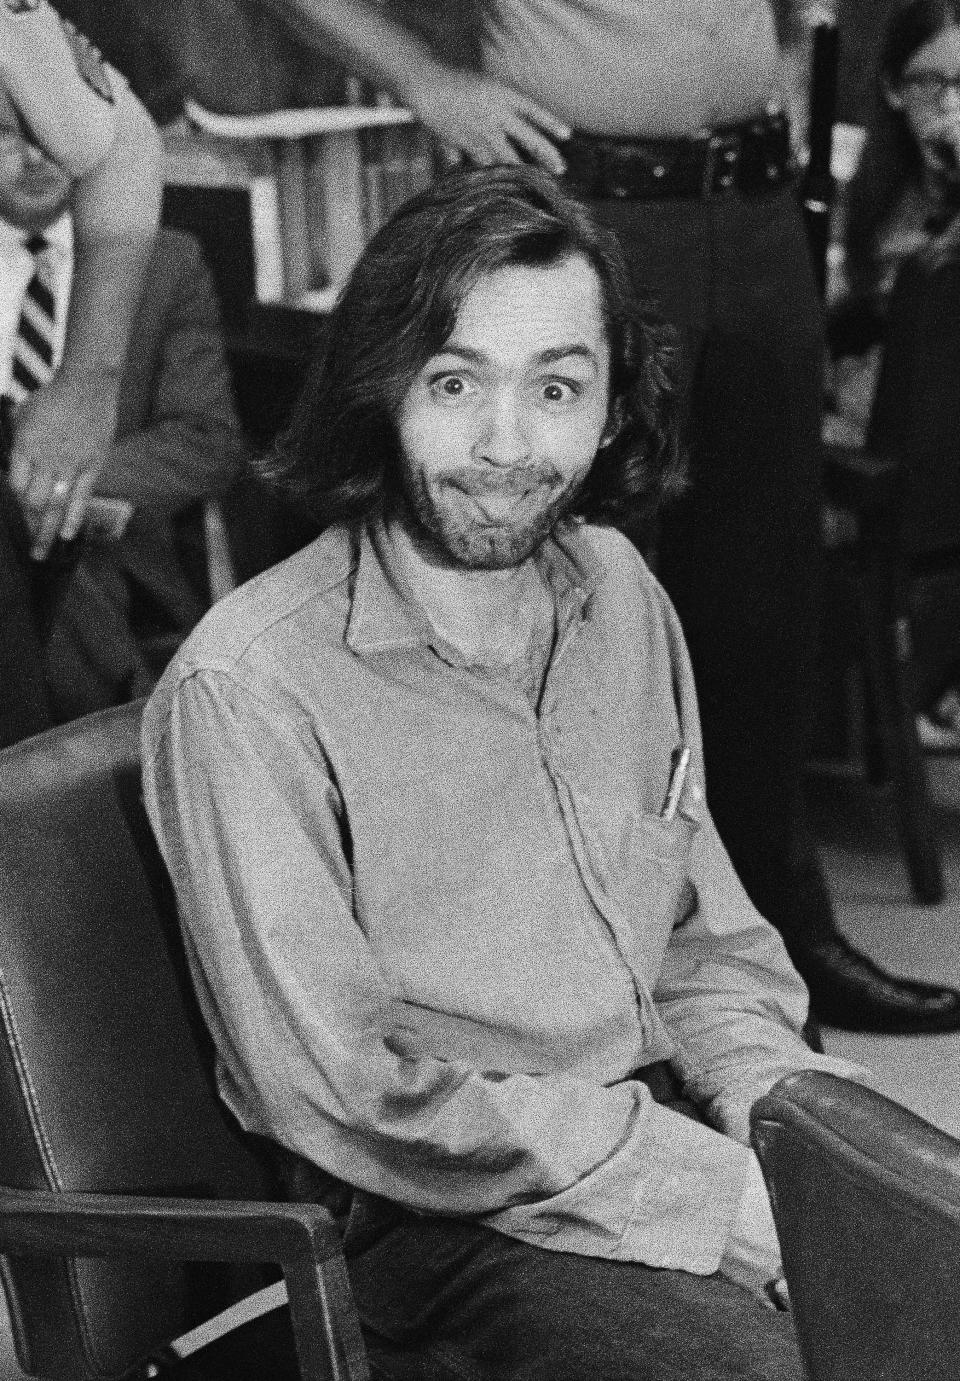 FILE - In this June 25, 1970, file photo, Charles Manson sticks his tongue out at photographers as he appears in a Santa Monica, Calif., courtroom on, charged with the slaying of musician Gary Hinman. Fifty years ago Charles Manson dispatched a group of disaffected young hippie followers on a two-night killing spree that terrorized Los Angeles and in the years since has come to represent the face of evil. On successive nights in August 1969, the so-called Manson family murdered seven people. (AP Photo/George Brich, File)